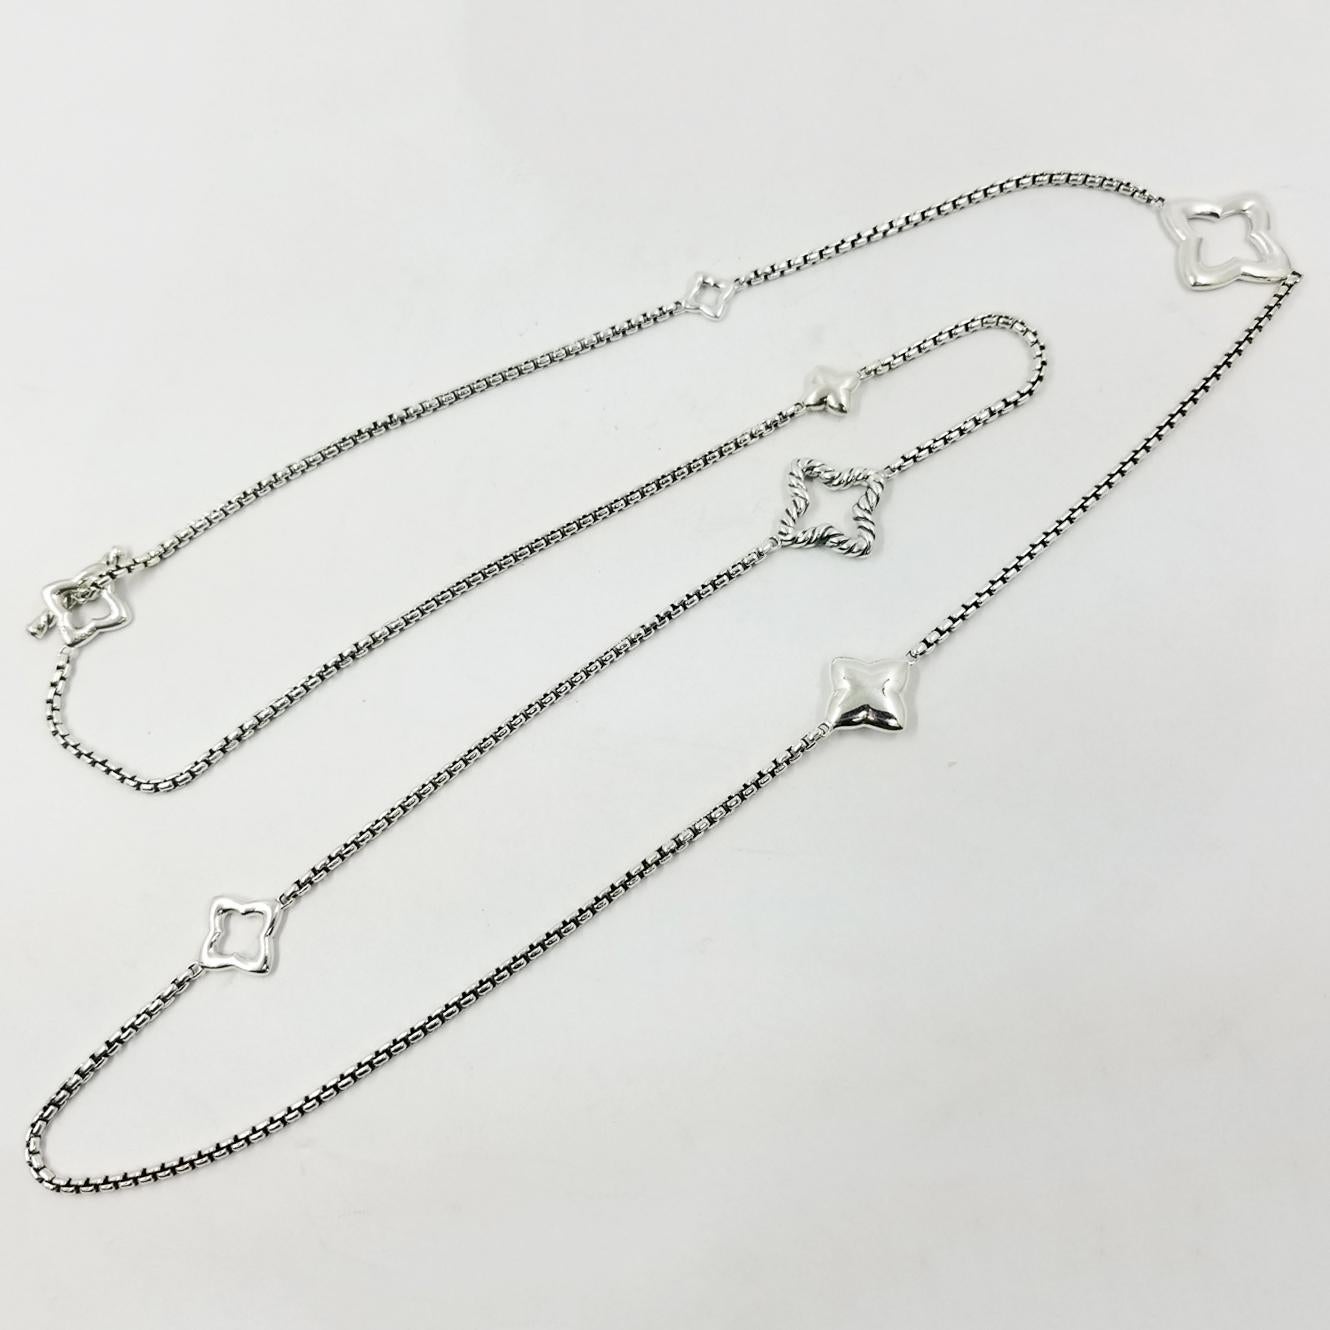 David Yurman Sterling Silver 36 Inch Long Necklace from the Quatrefoil Collection. Original MSRP $700. Toggle Clasp. Professionally Cleaned and Polished. Comes With Yurman Travel Pouch.